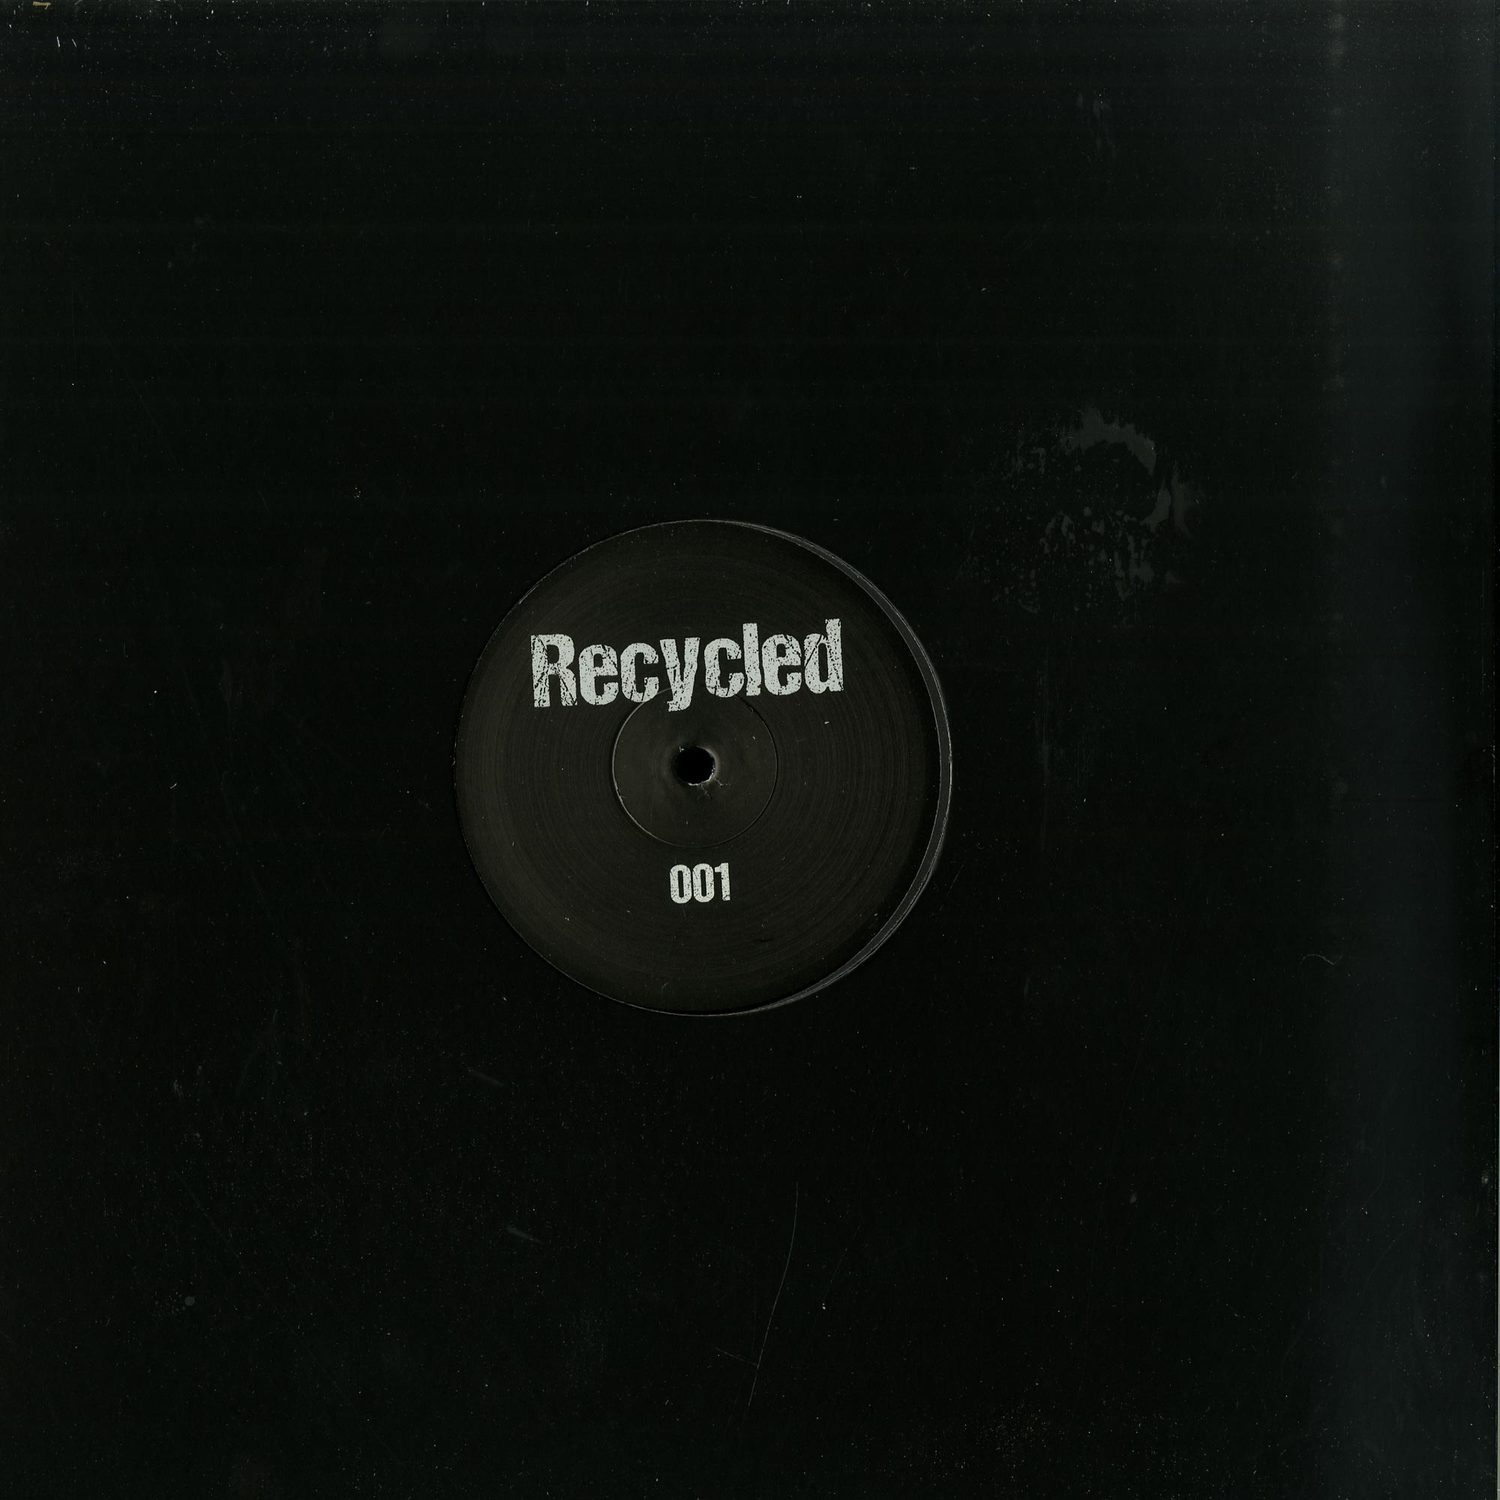 Recycled - RECYCLED 001 